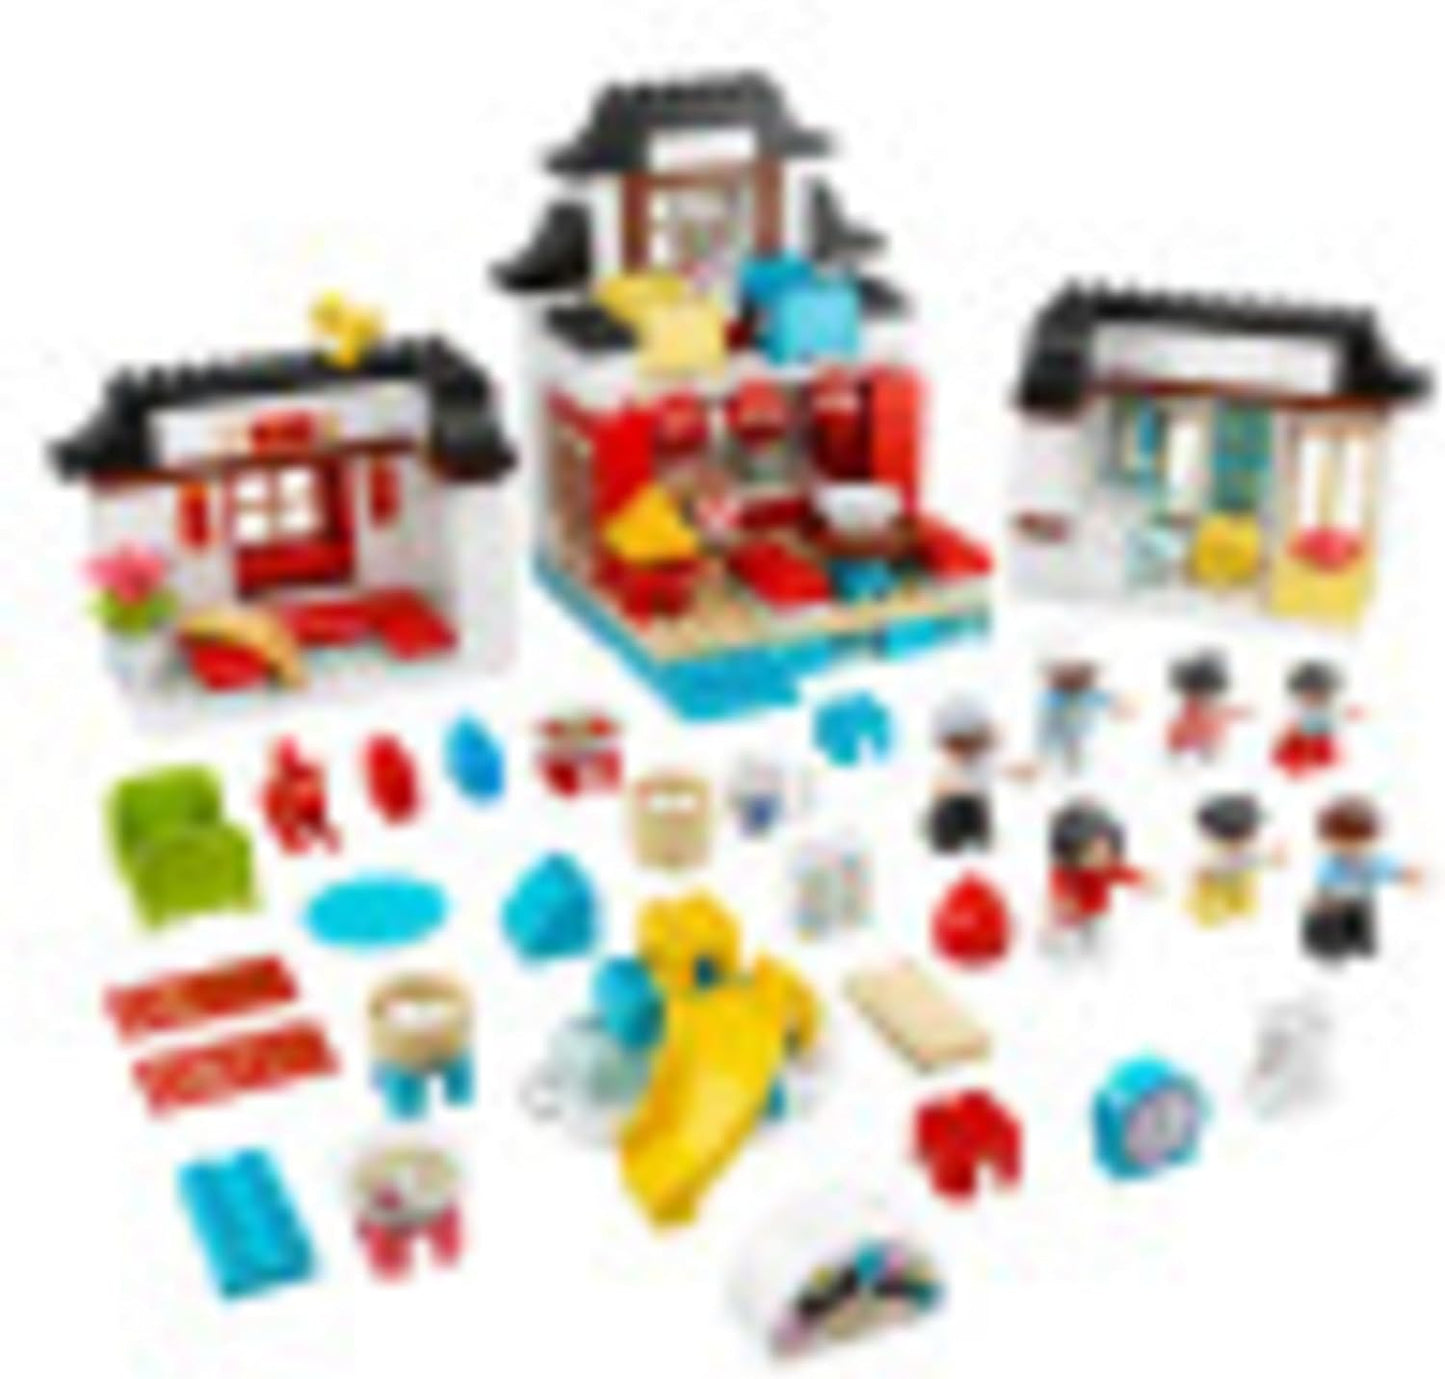 LEGO DUPLO Town Happy Childhood Moments 10943 Family House Toy Playset; Imaginative Play and Creative Fun for Kids, New 2021 (227 Pieces)